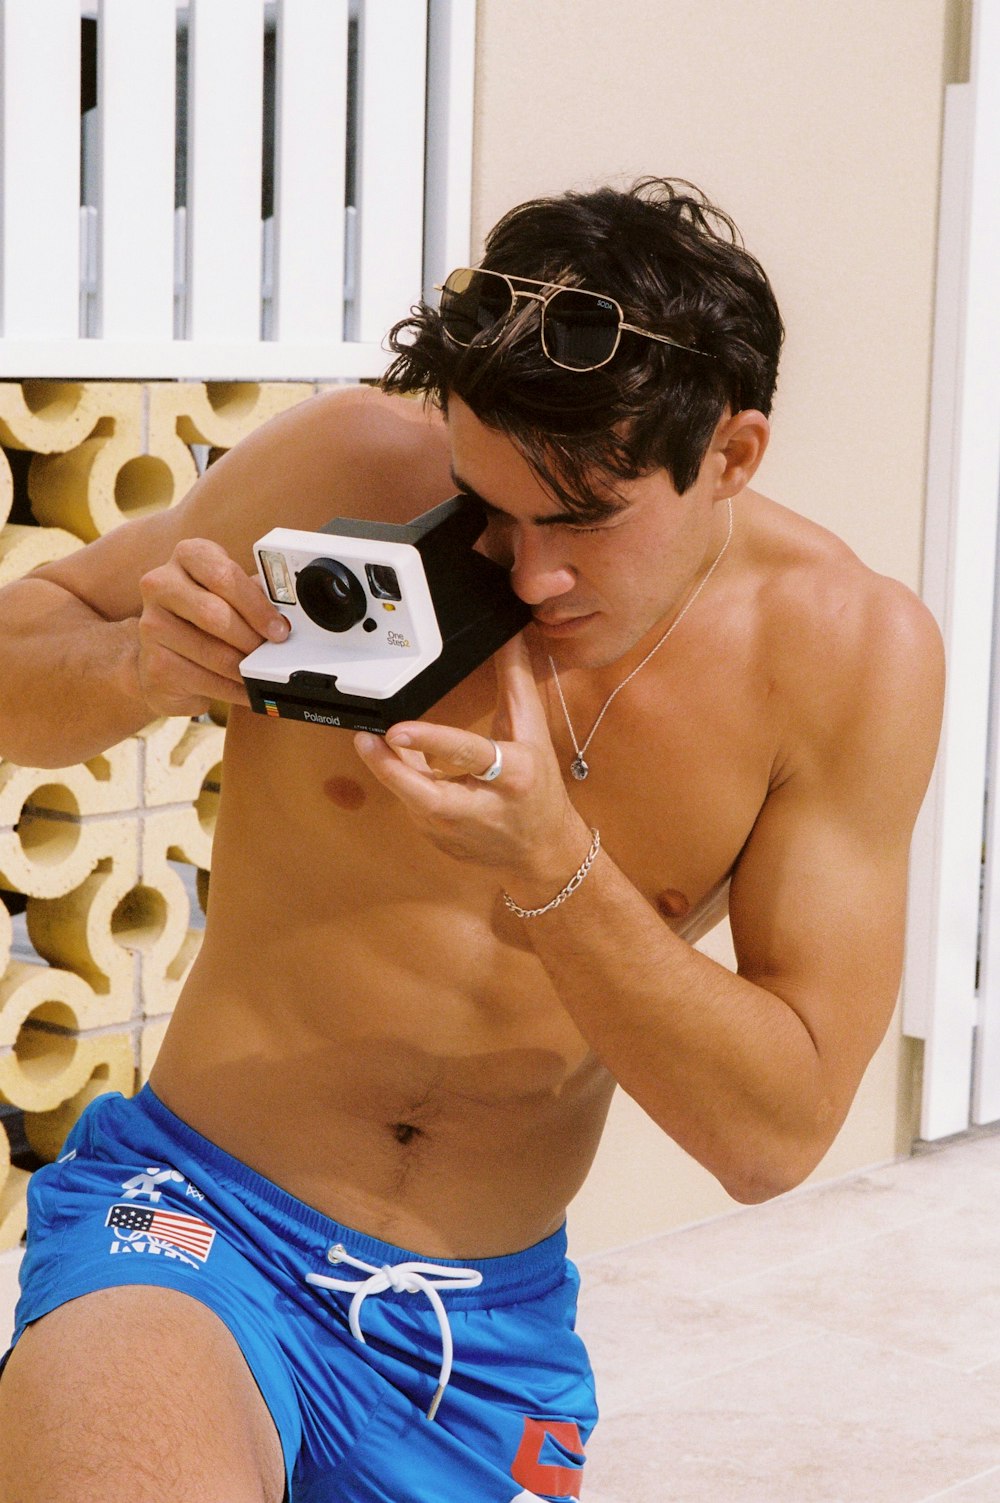 a shirtless man taking a picture with a camera